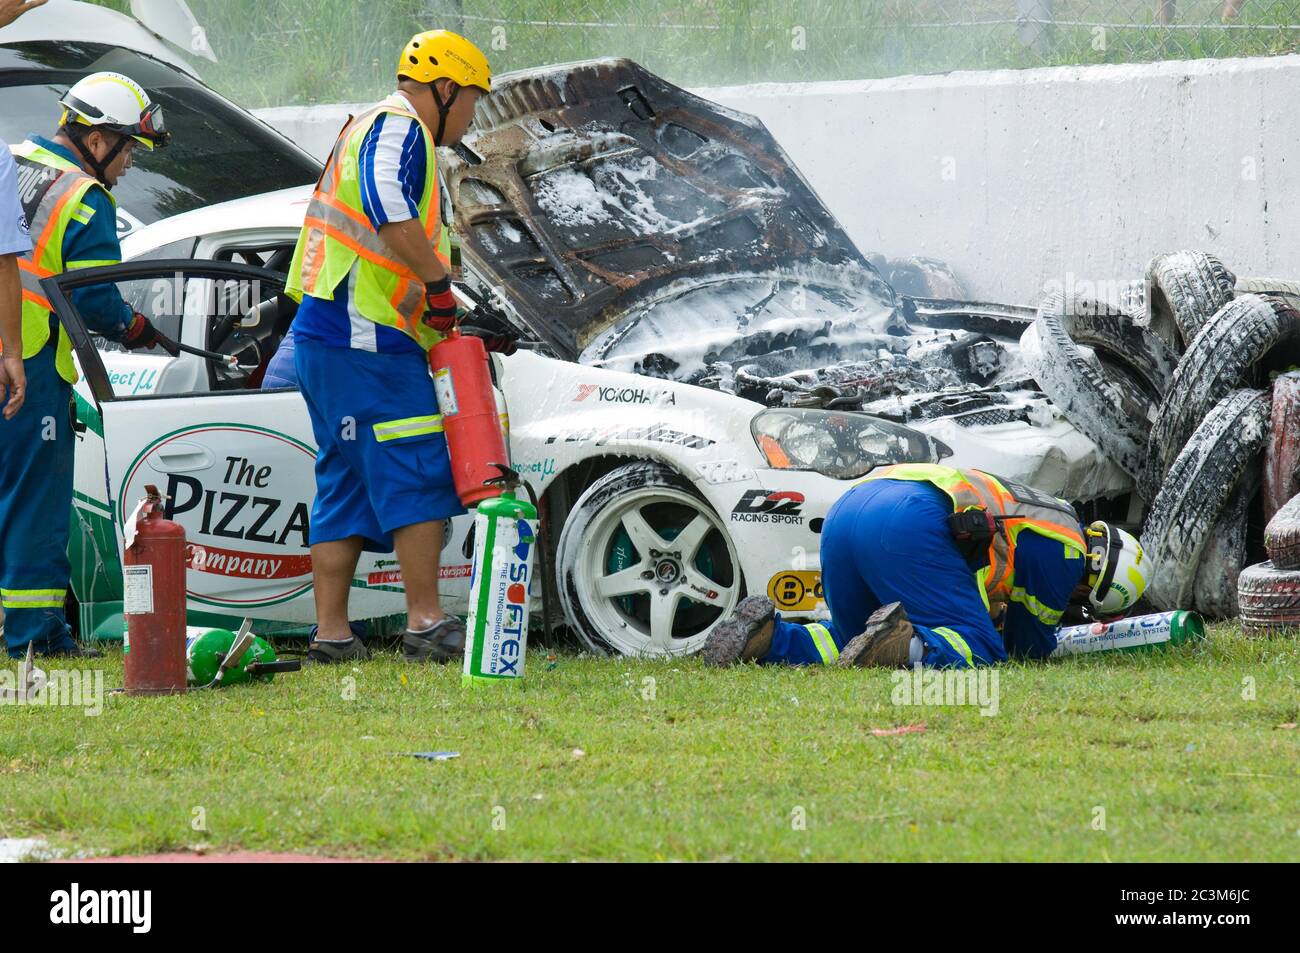 PATTAYA - JUNE 17: Rescue workers extinguish a fire in a wrecked Honda Integra during a touring car race at Bira Circuit, Pattaya, Thailand on June 17 Stock Photo